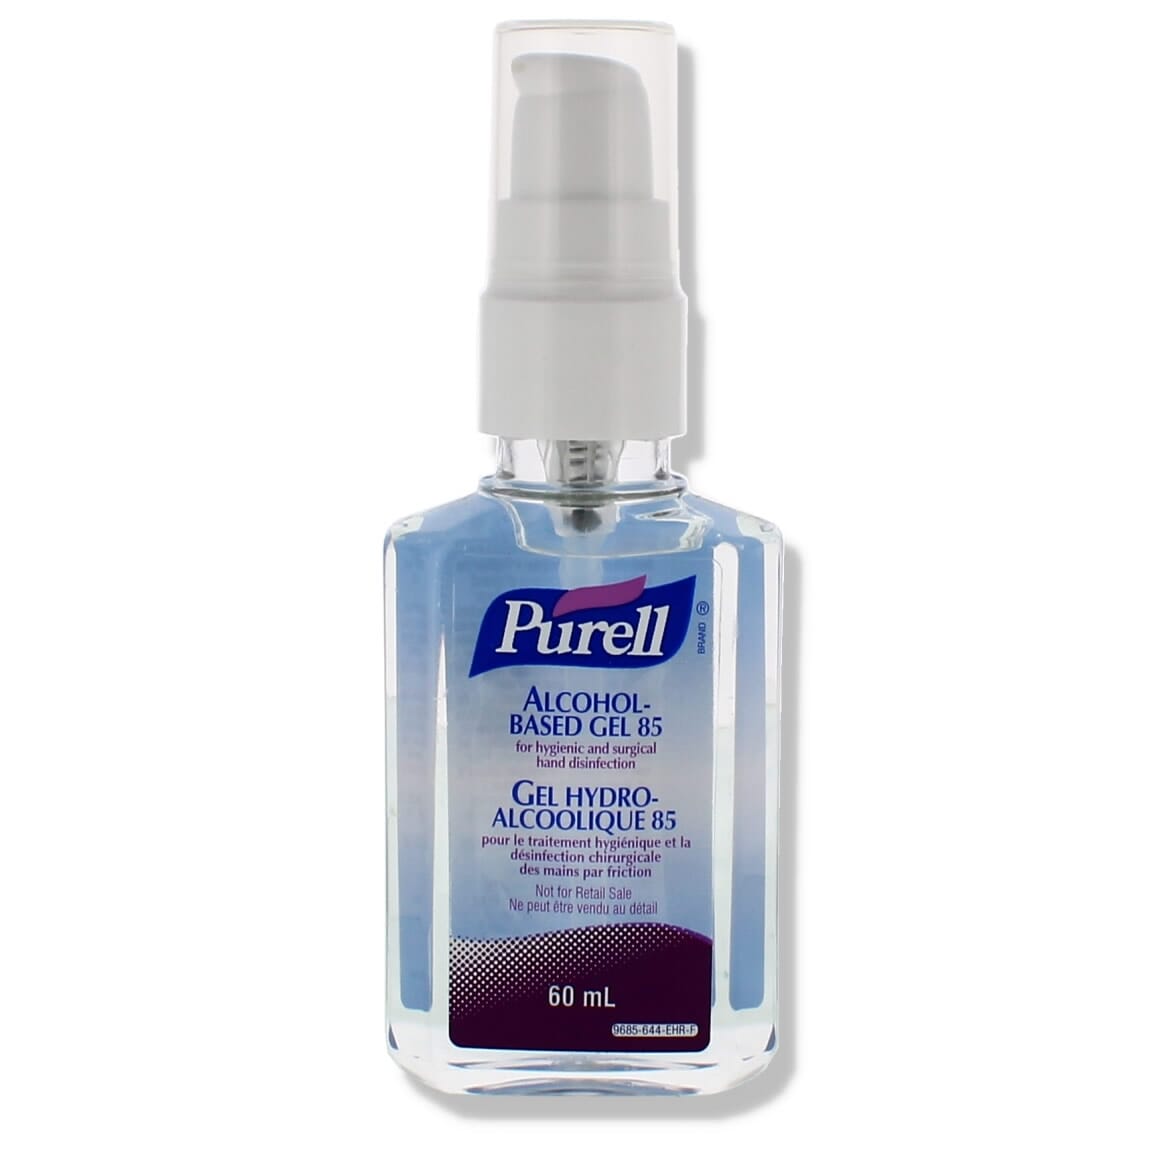 View Purell Personal Hand Sanitiser Bottle only information